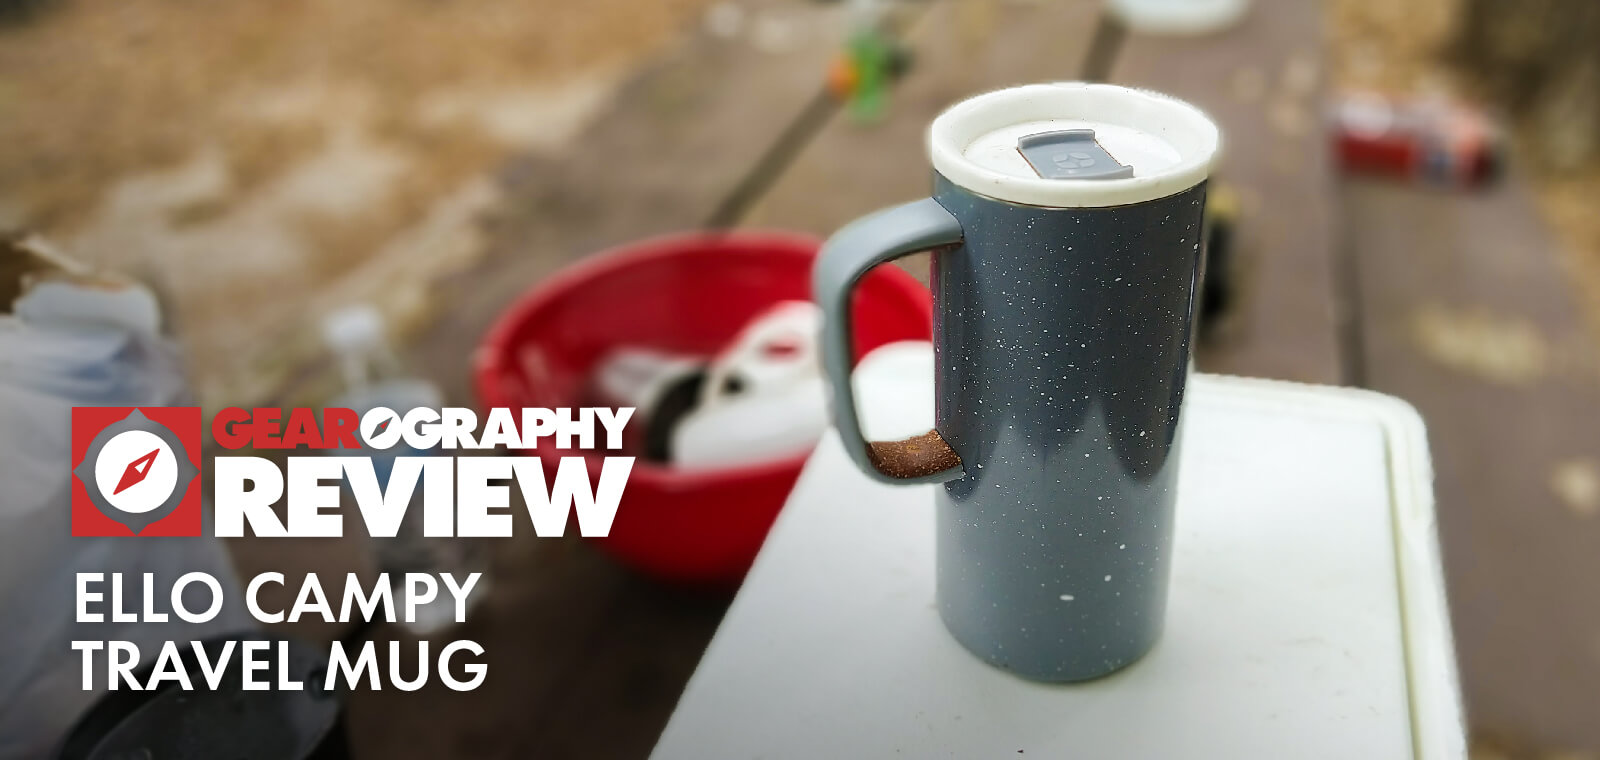 REVIEW: Ello Campy Insulated Travel Mug - GEAROGRAPHY